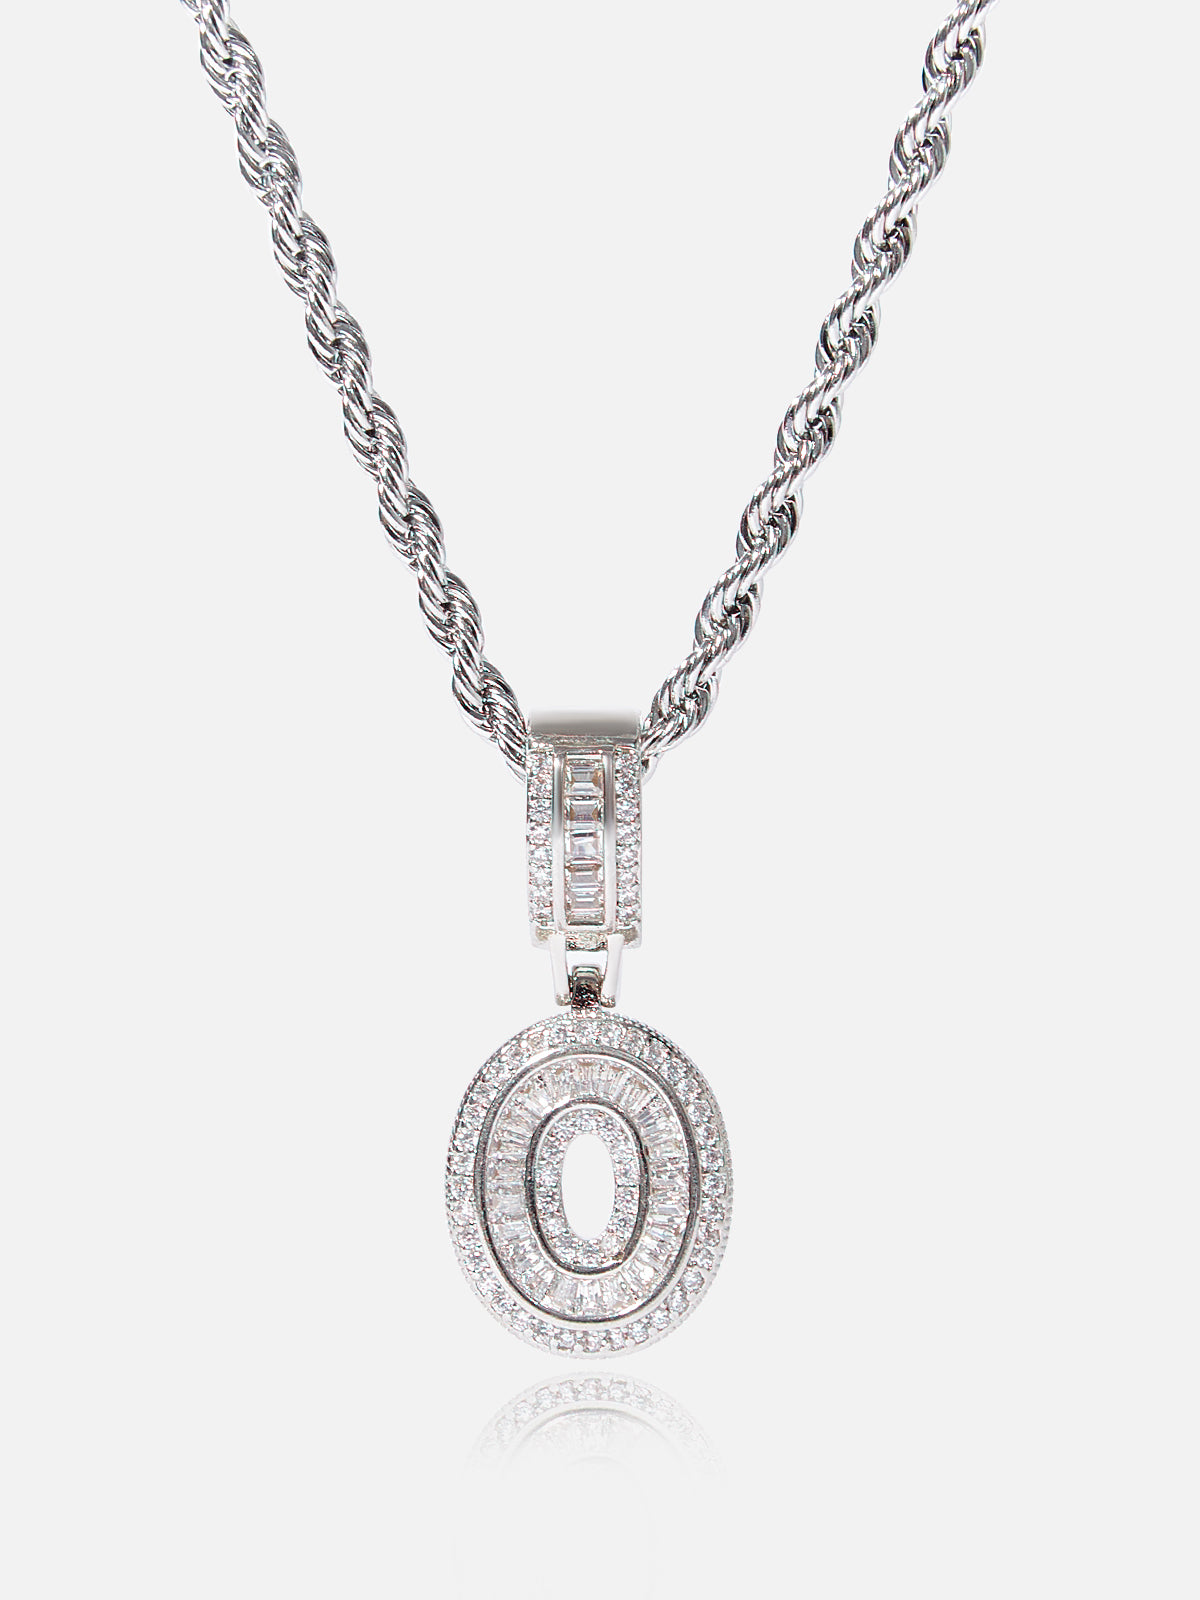 NOISSEY Full Pave Necklace